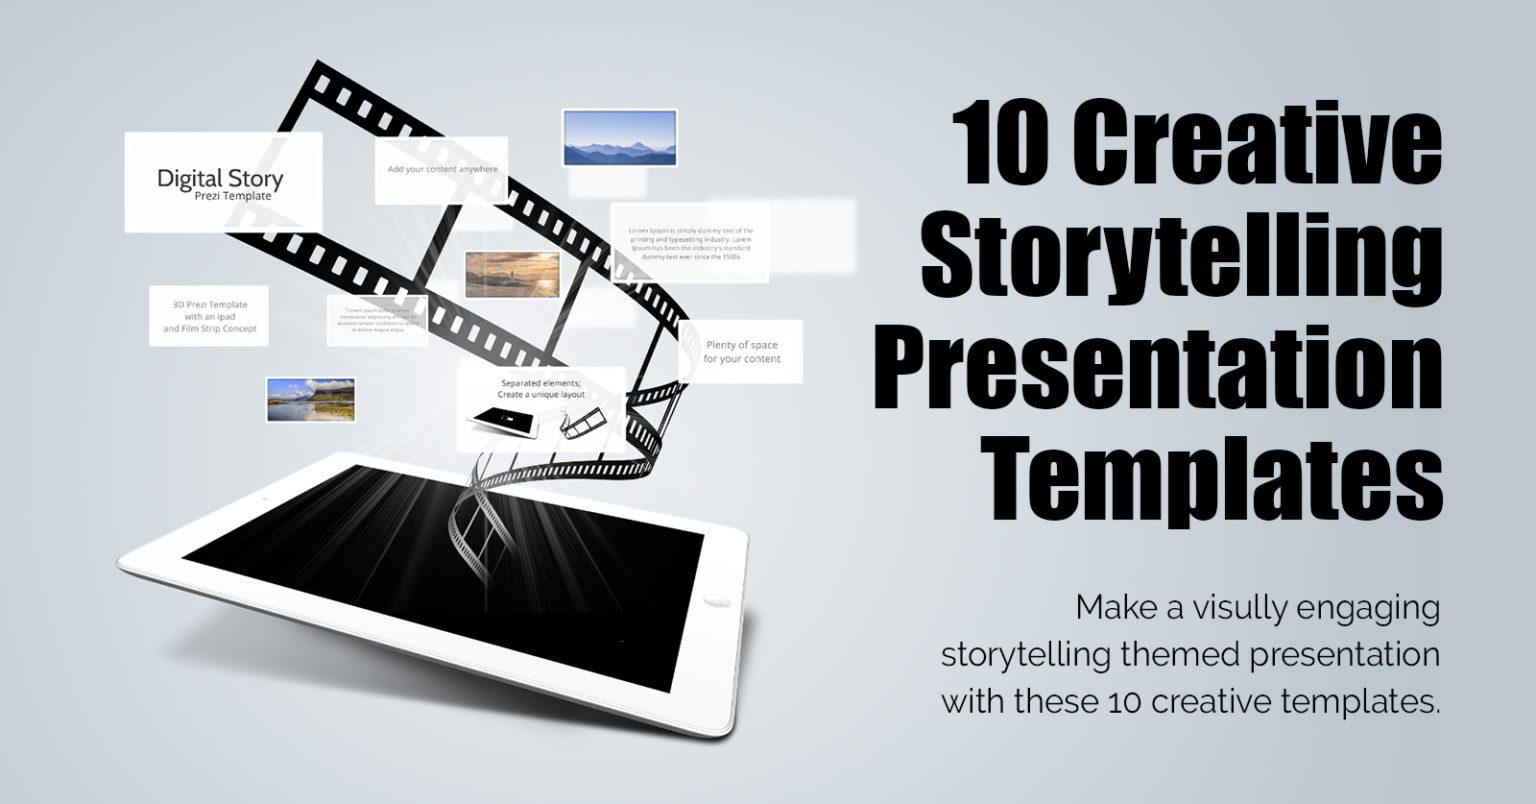 storytelling techniques in a presentation